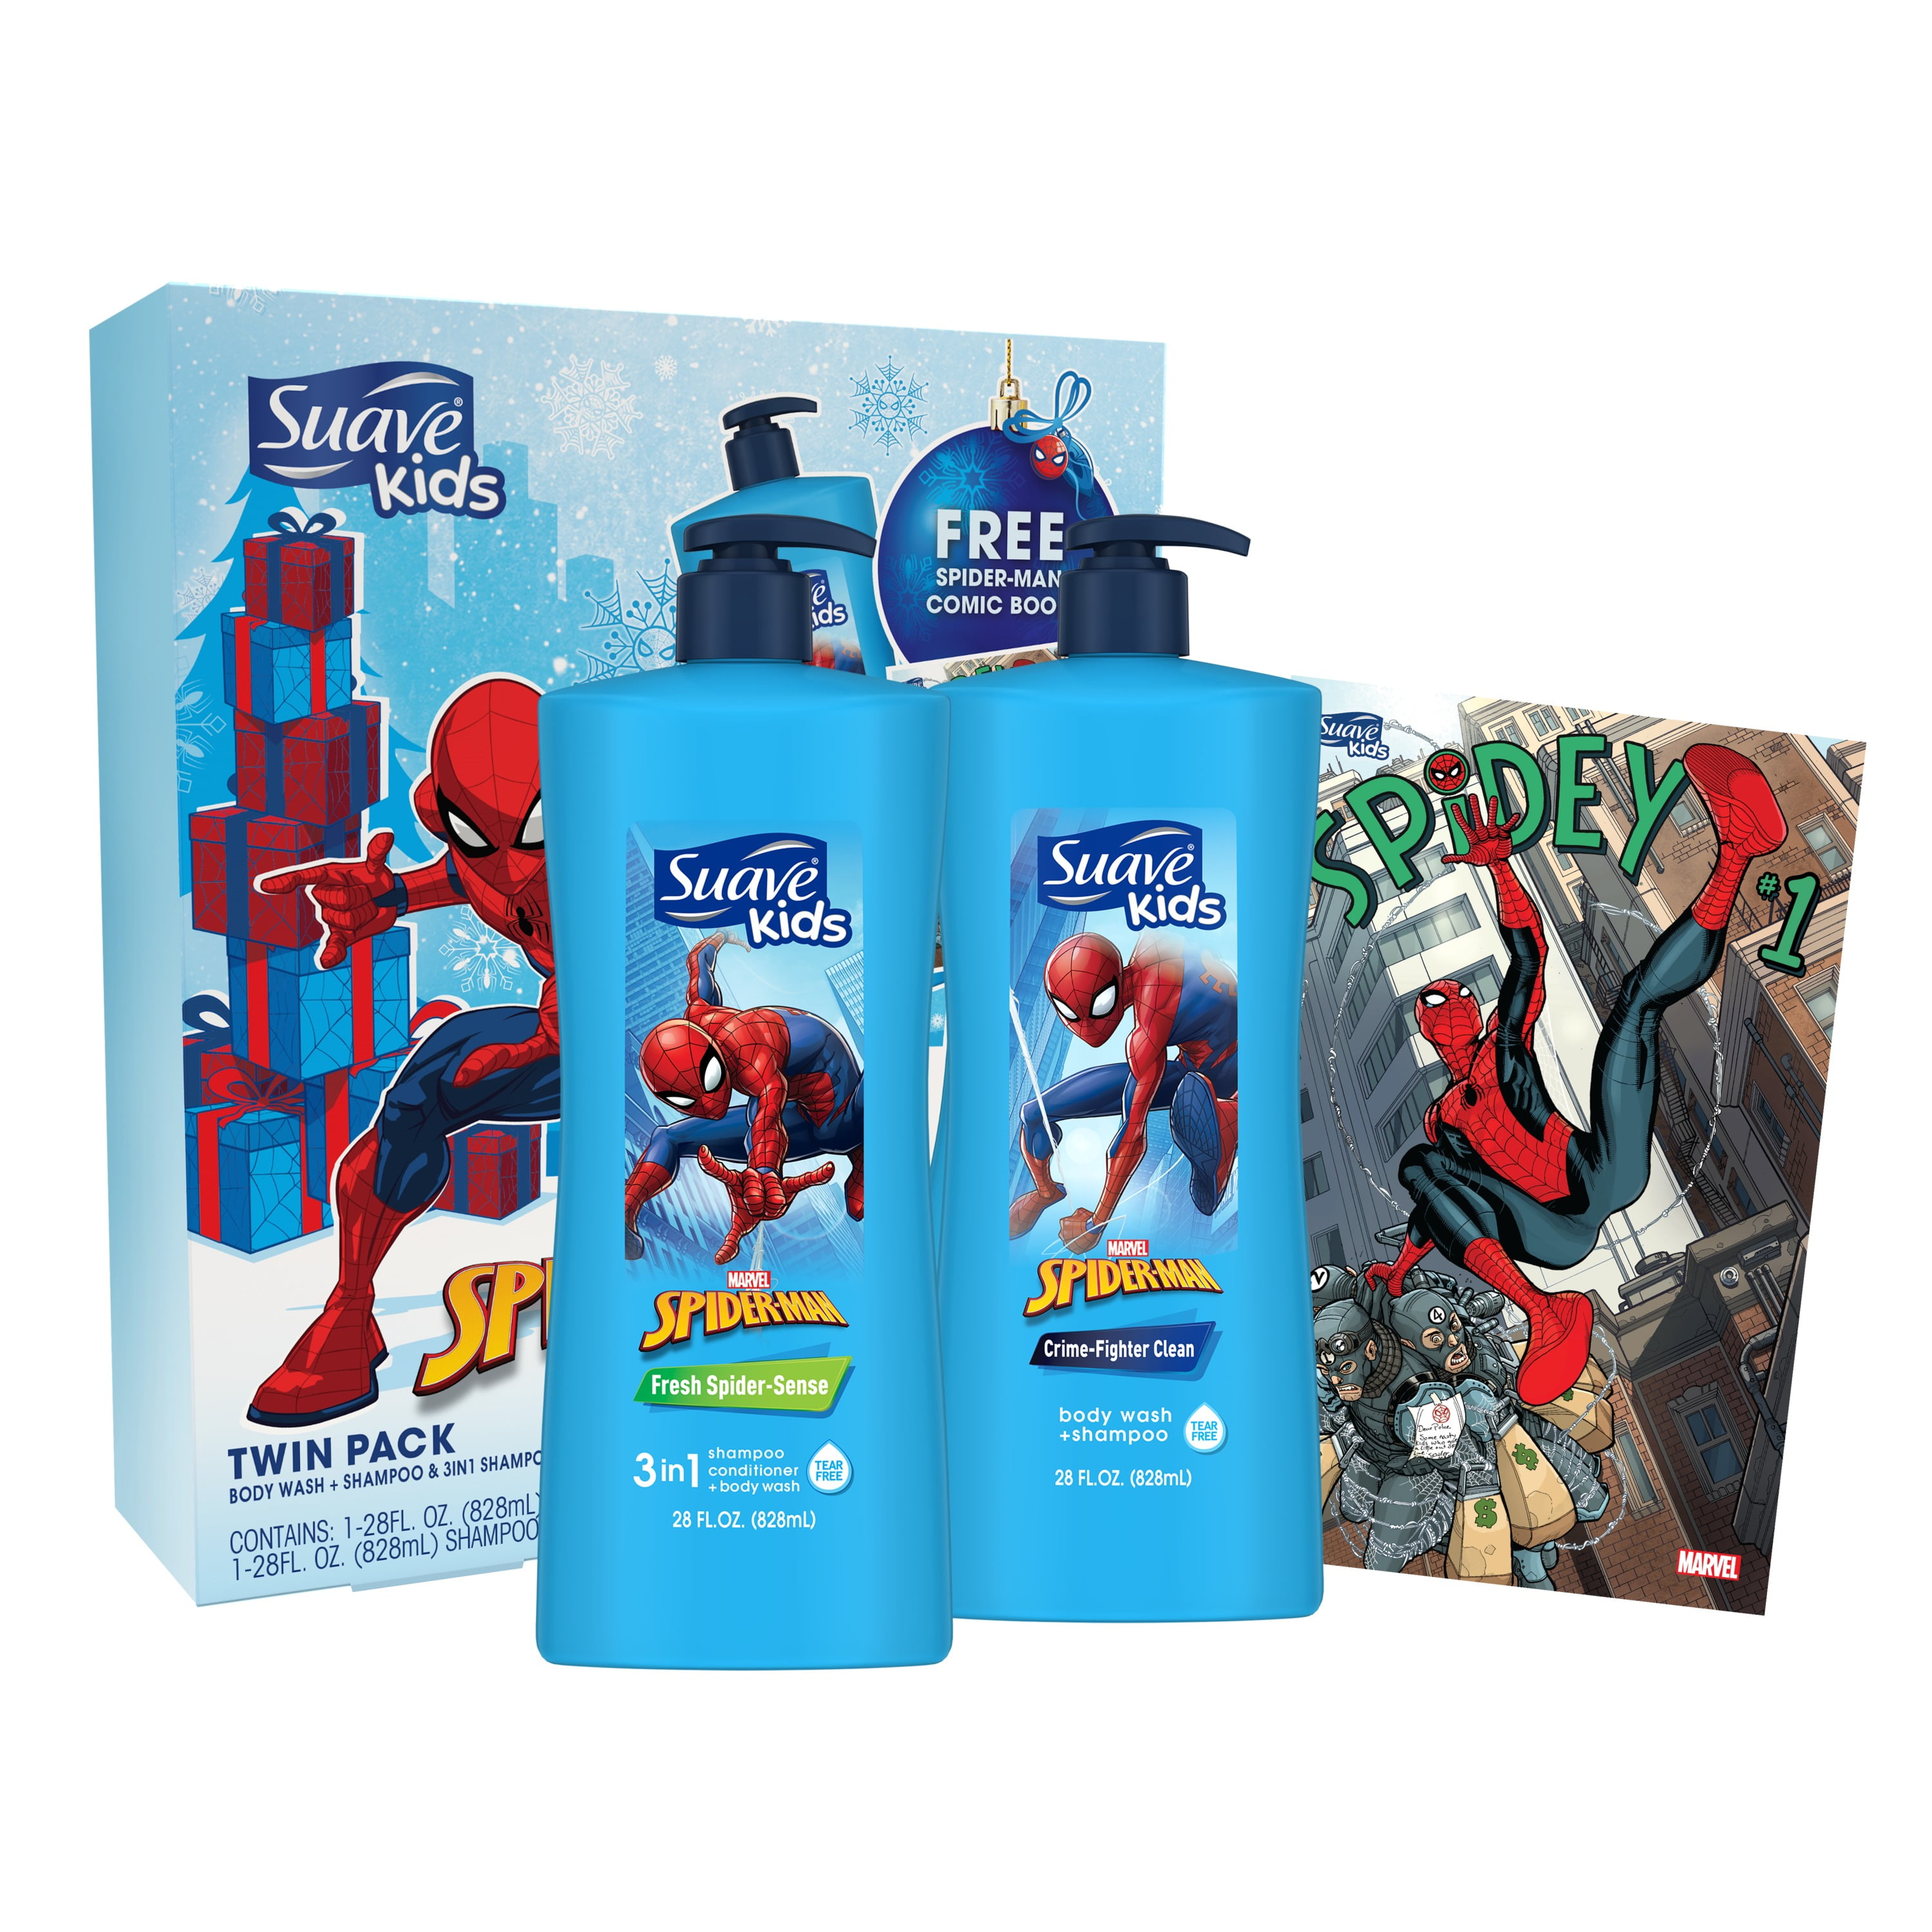  Suave Kids 3 in 1 Shampoo Conditioner Body Wash For Tear-Free  Bath Time, Fresh Spider-Sense, Dermatologist-Tested Kids Shampoo 3 in 1  Formula 28 oz, Pack of 4 : Beauty & Personal Care